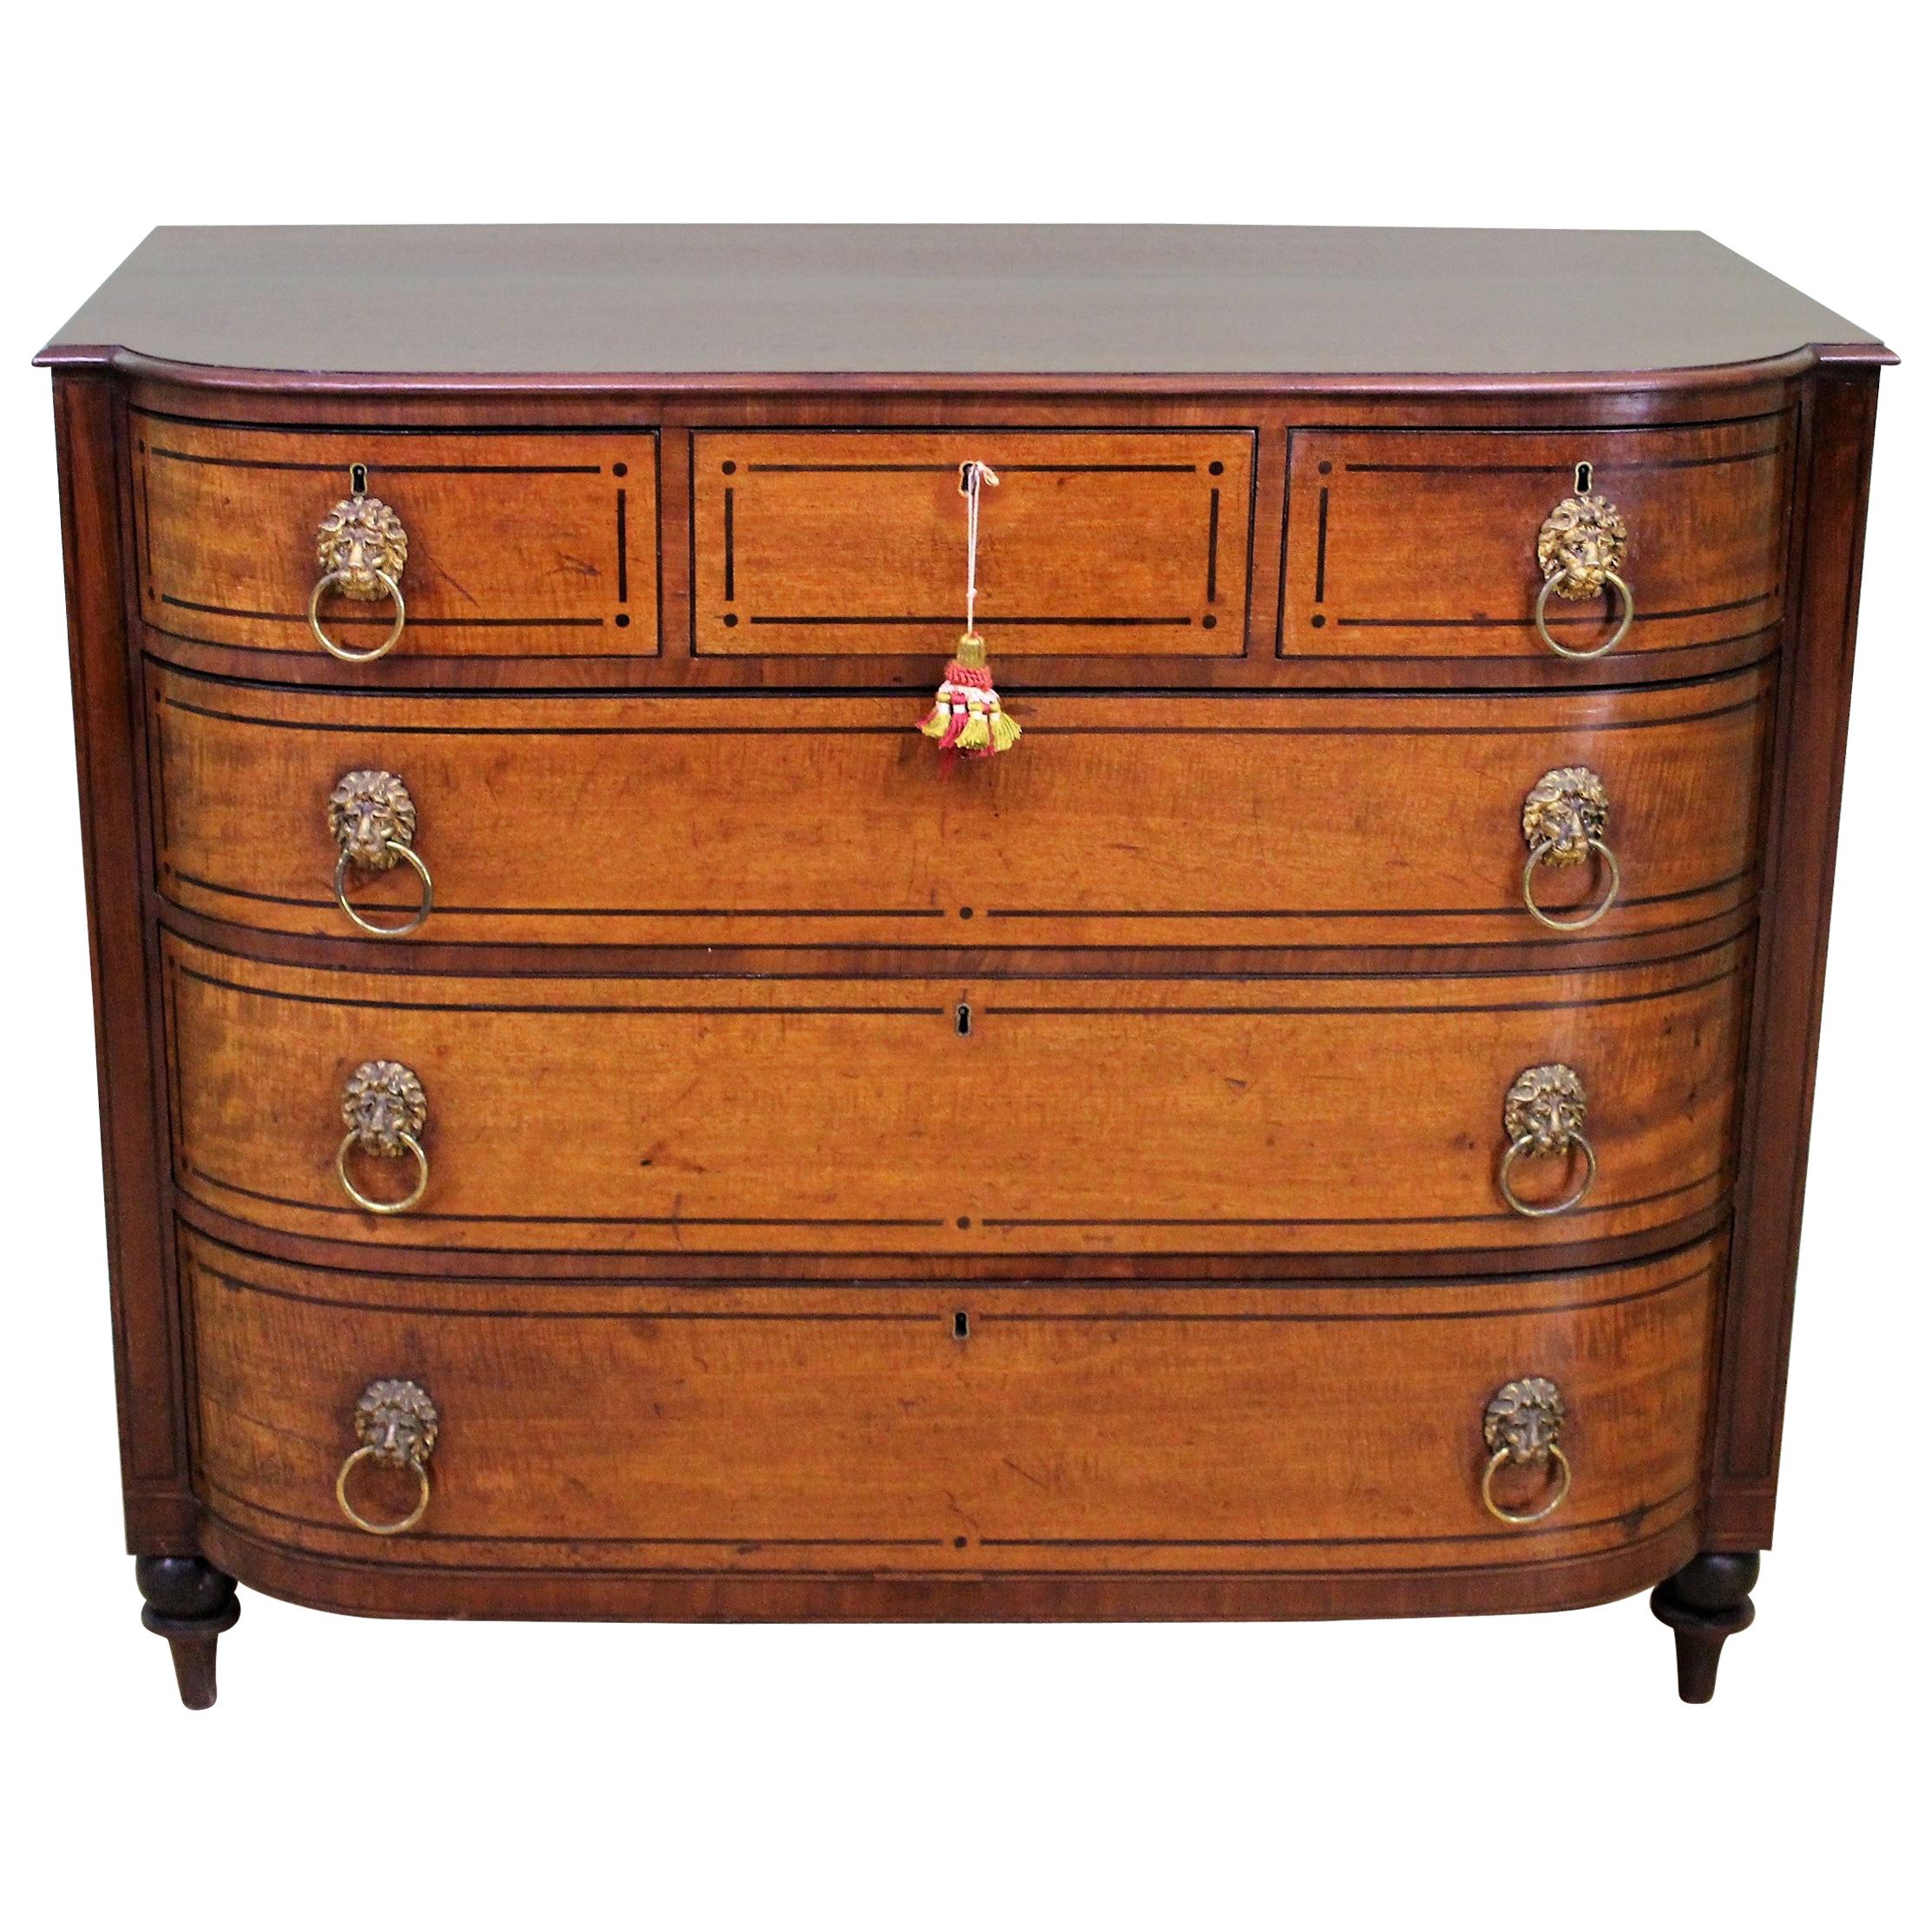 Ebony Inlaid Regency Mahogany Chest of Drawers For Sale